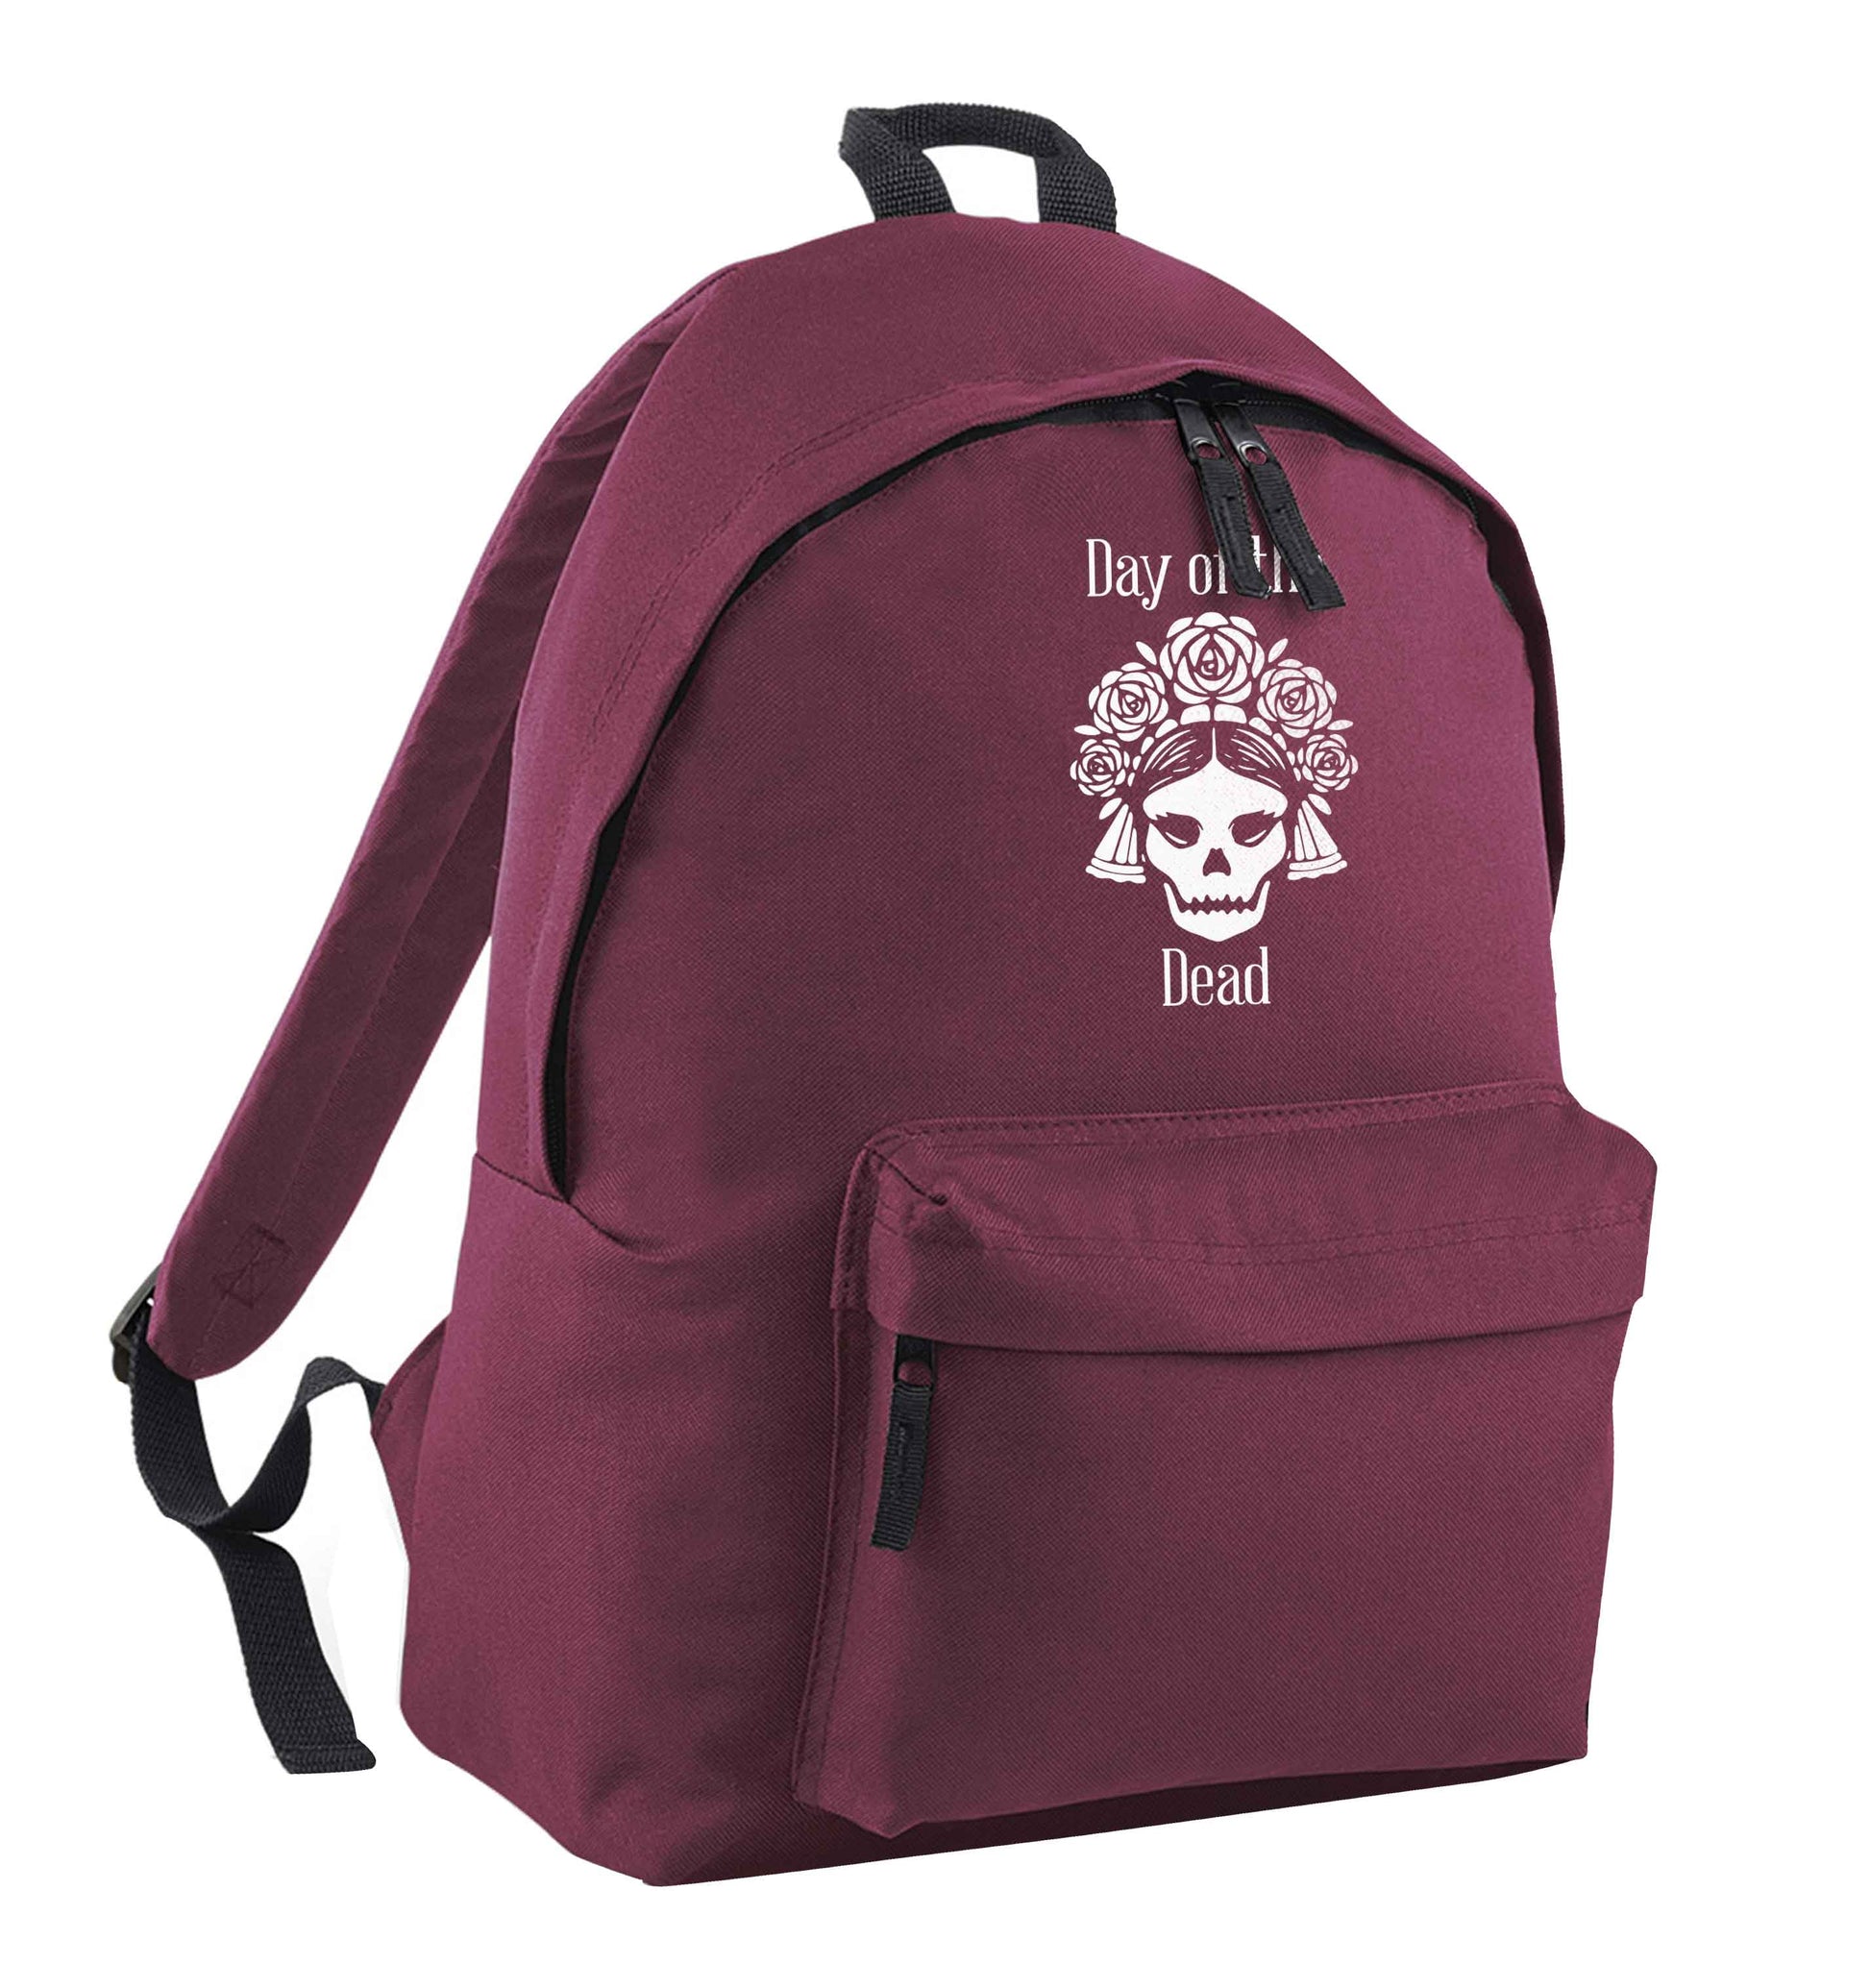 Day of the dead maroon children's backpack